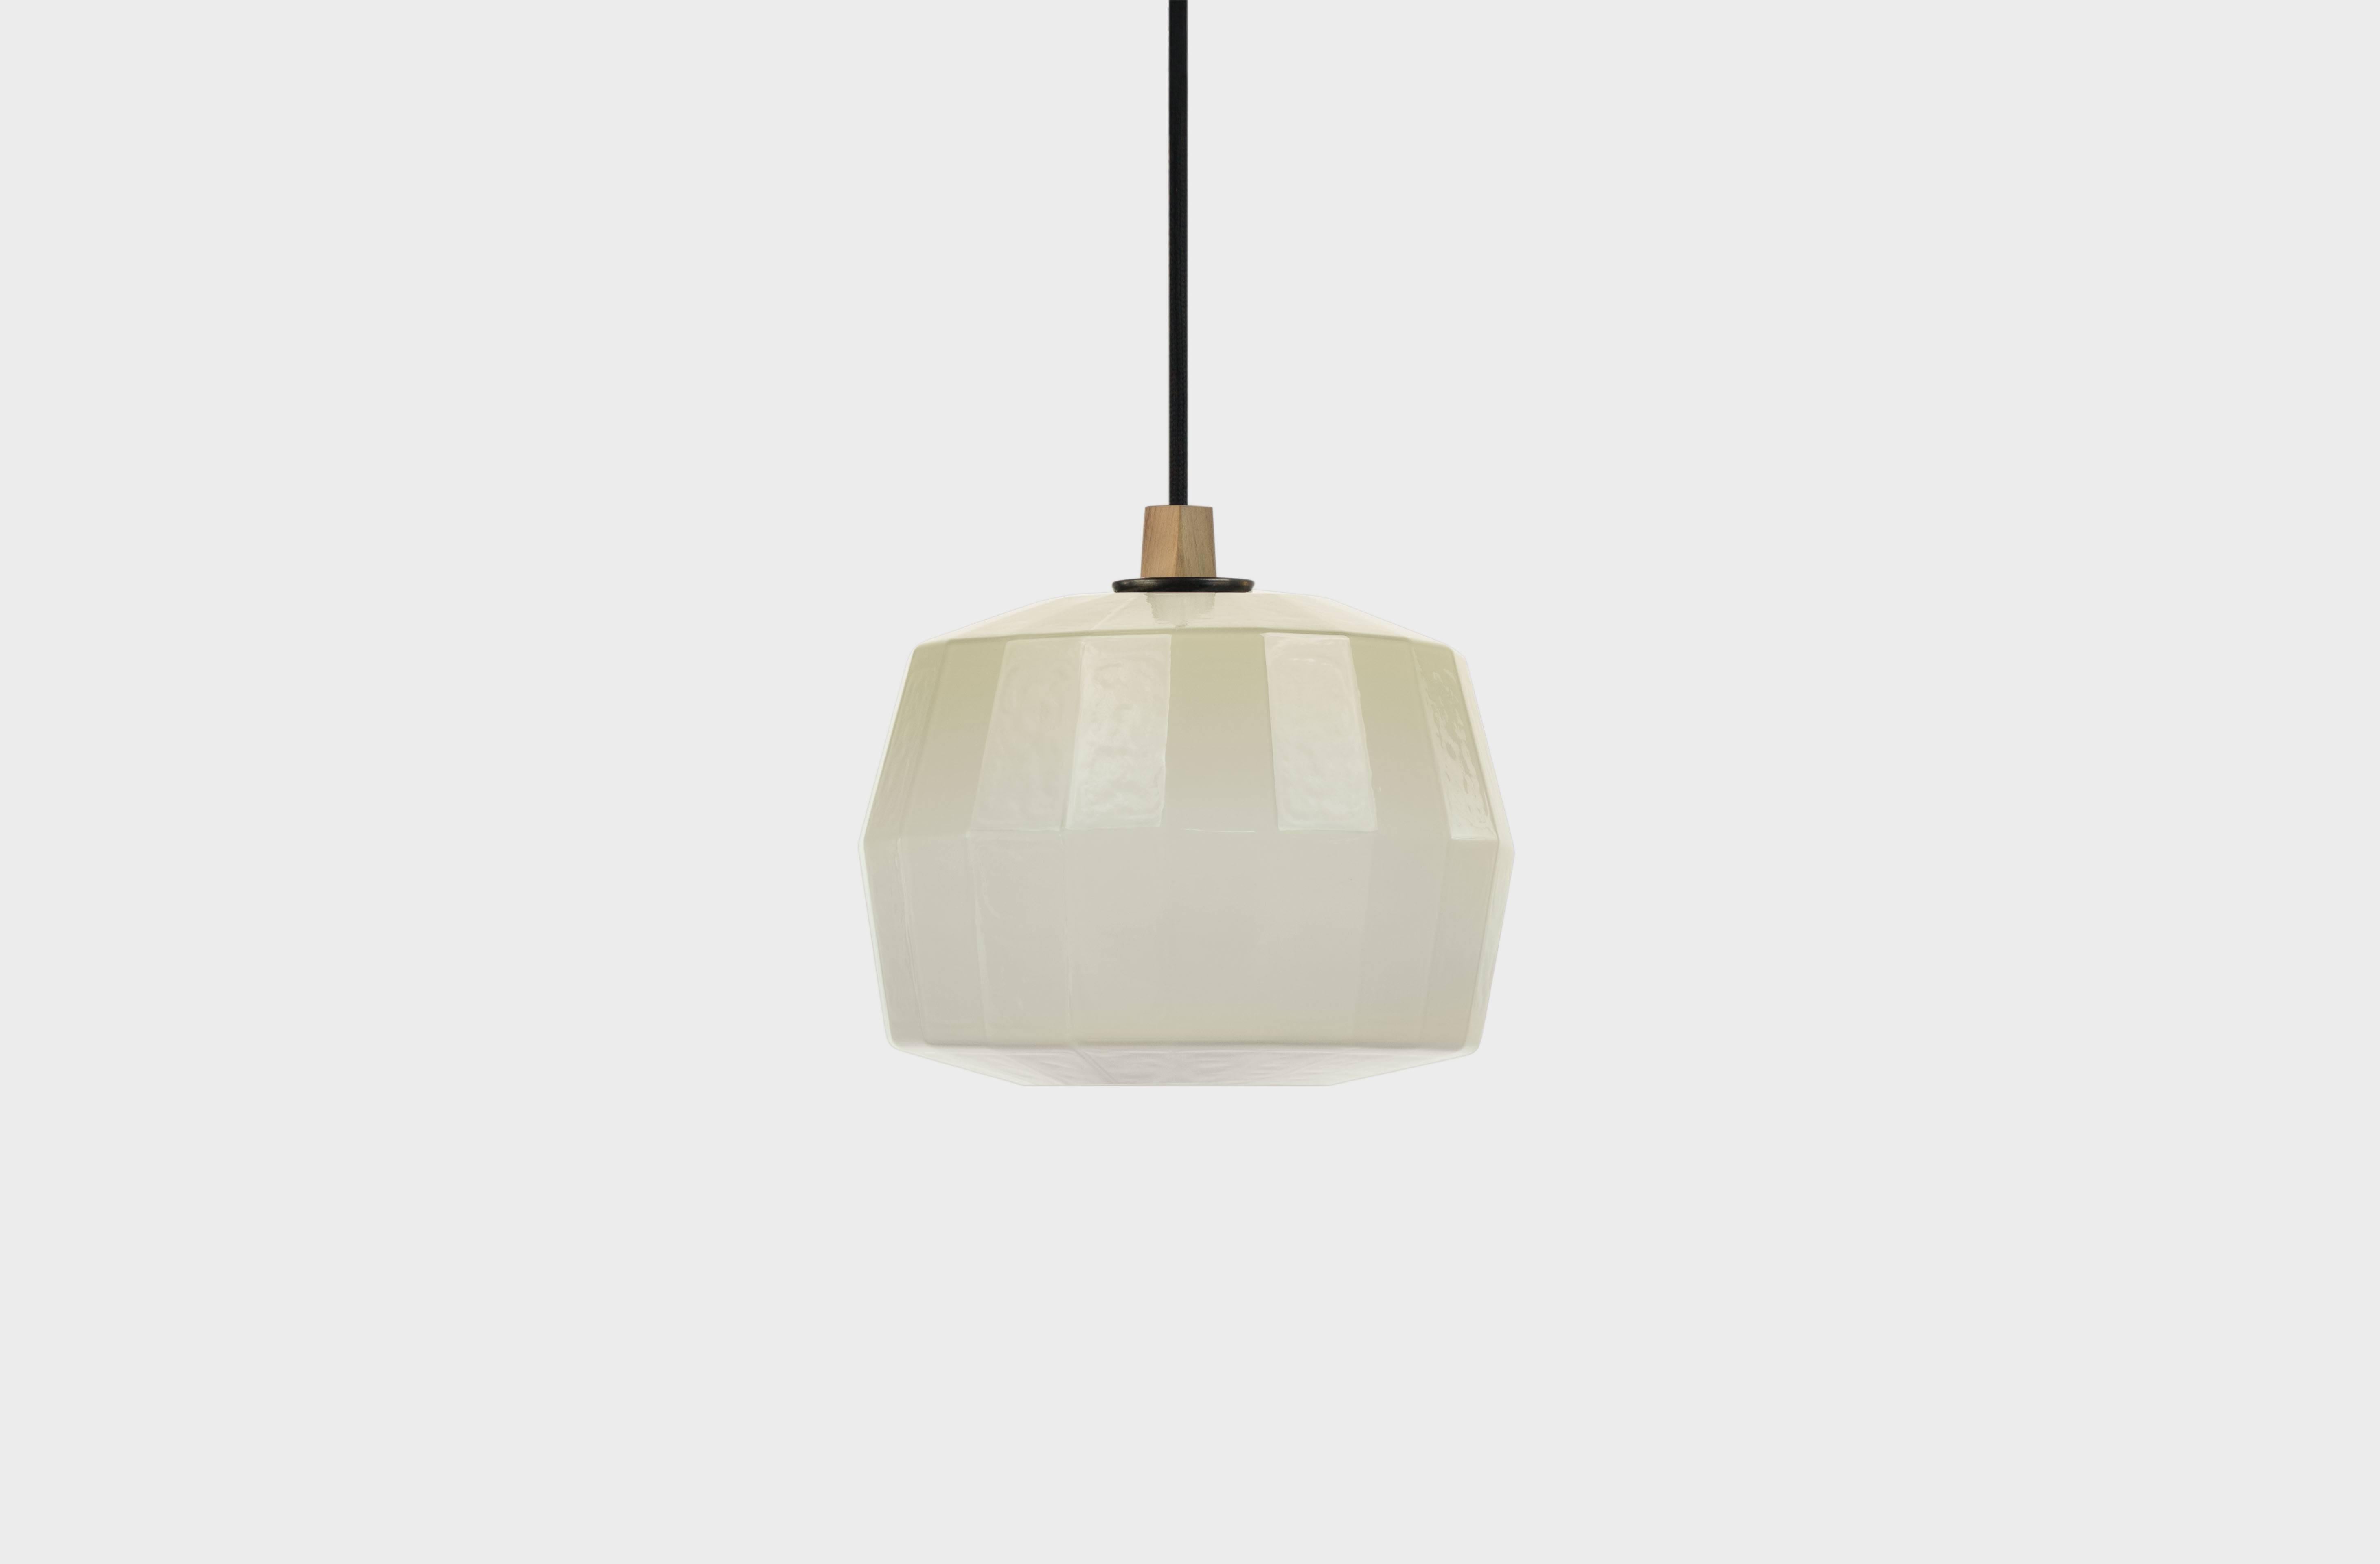 Votta - 8”H x 9.5”L x 9.5”W is available in 7 colors.

The Poly Pop Pendant Collection gives geometrically ridged architectural structure to common organic forms. Drawing inspiration from Art Deco and early Modernist lighting and decorative